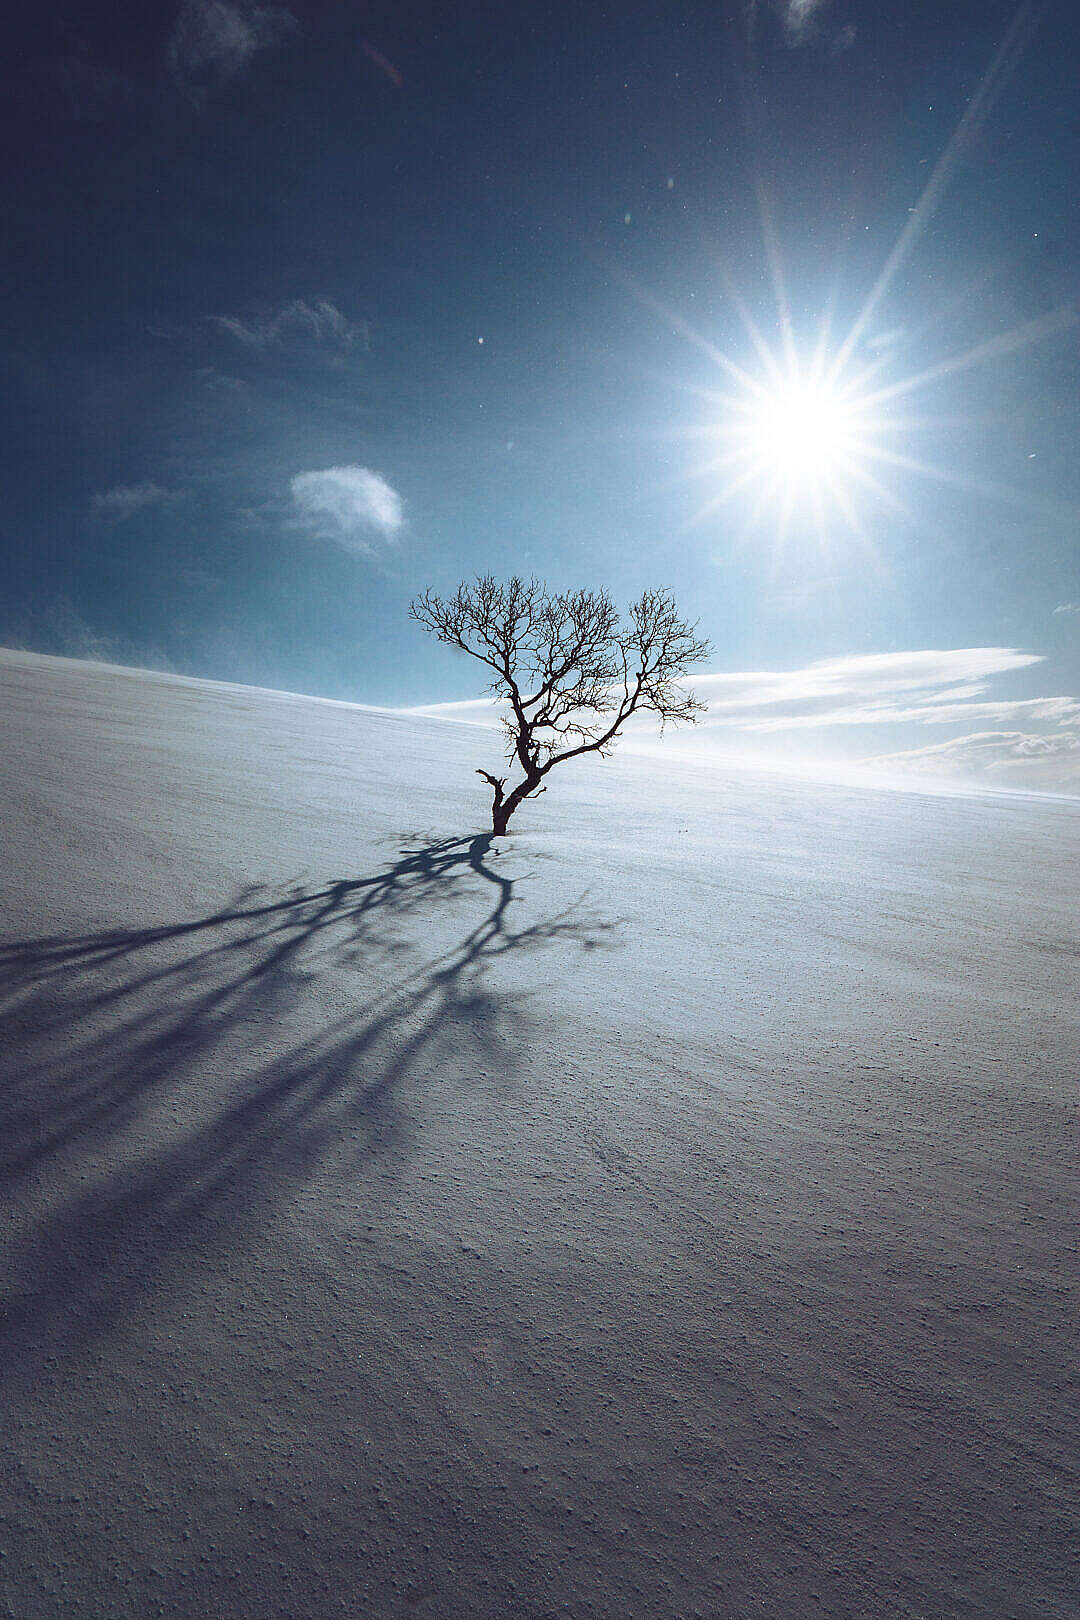 Download Lonely Tree in the Middle of the Snow Plain FREE Stock Photo